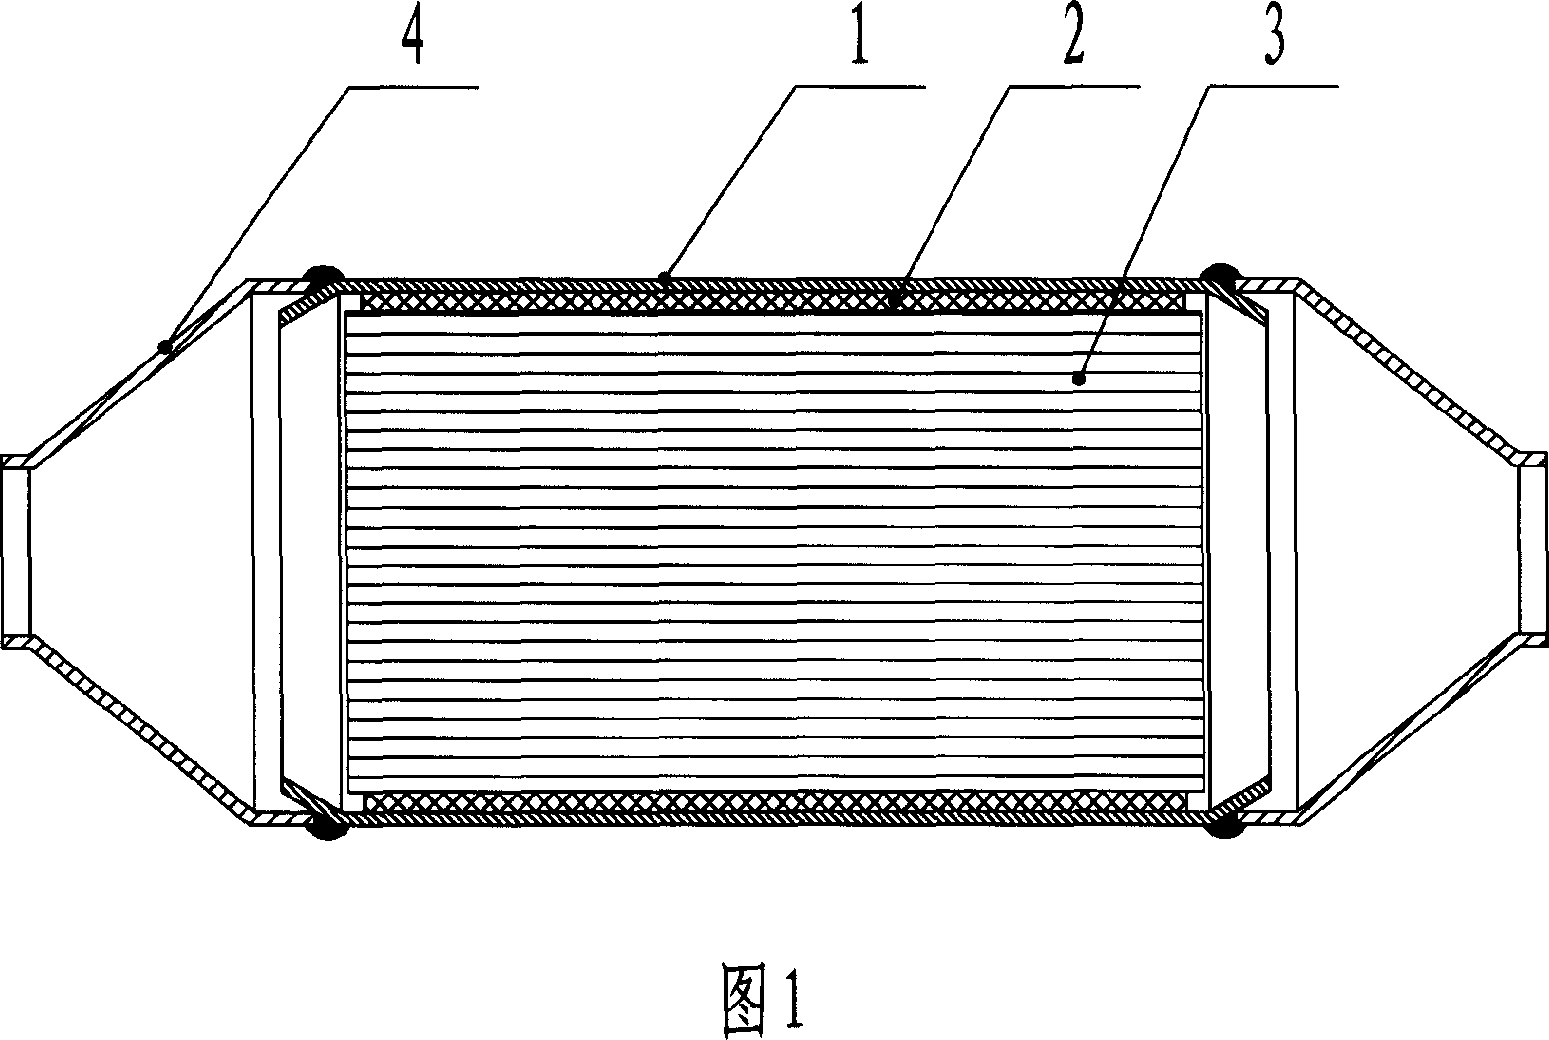 Binding-packaging process for triple purifier of automobile